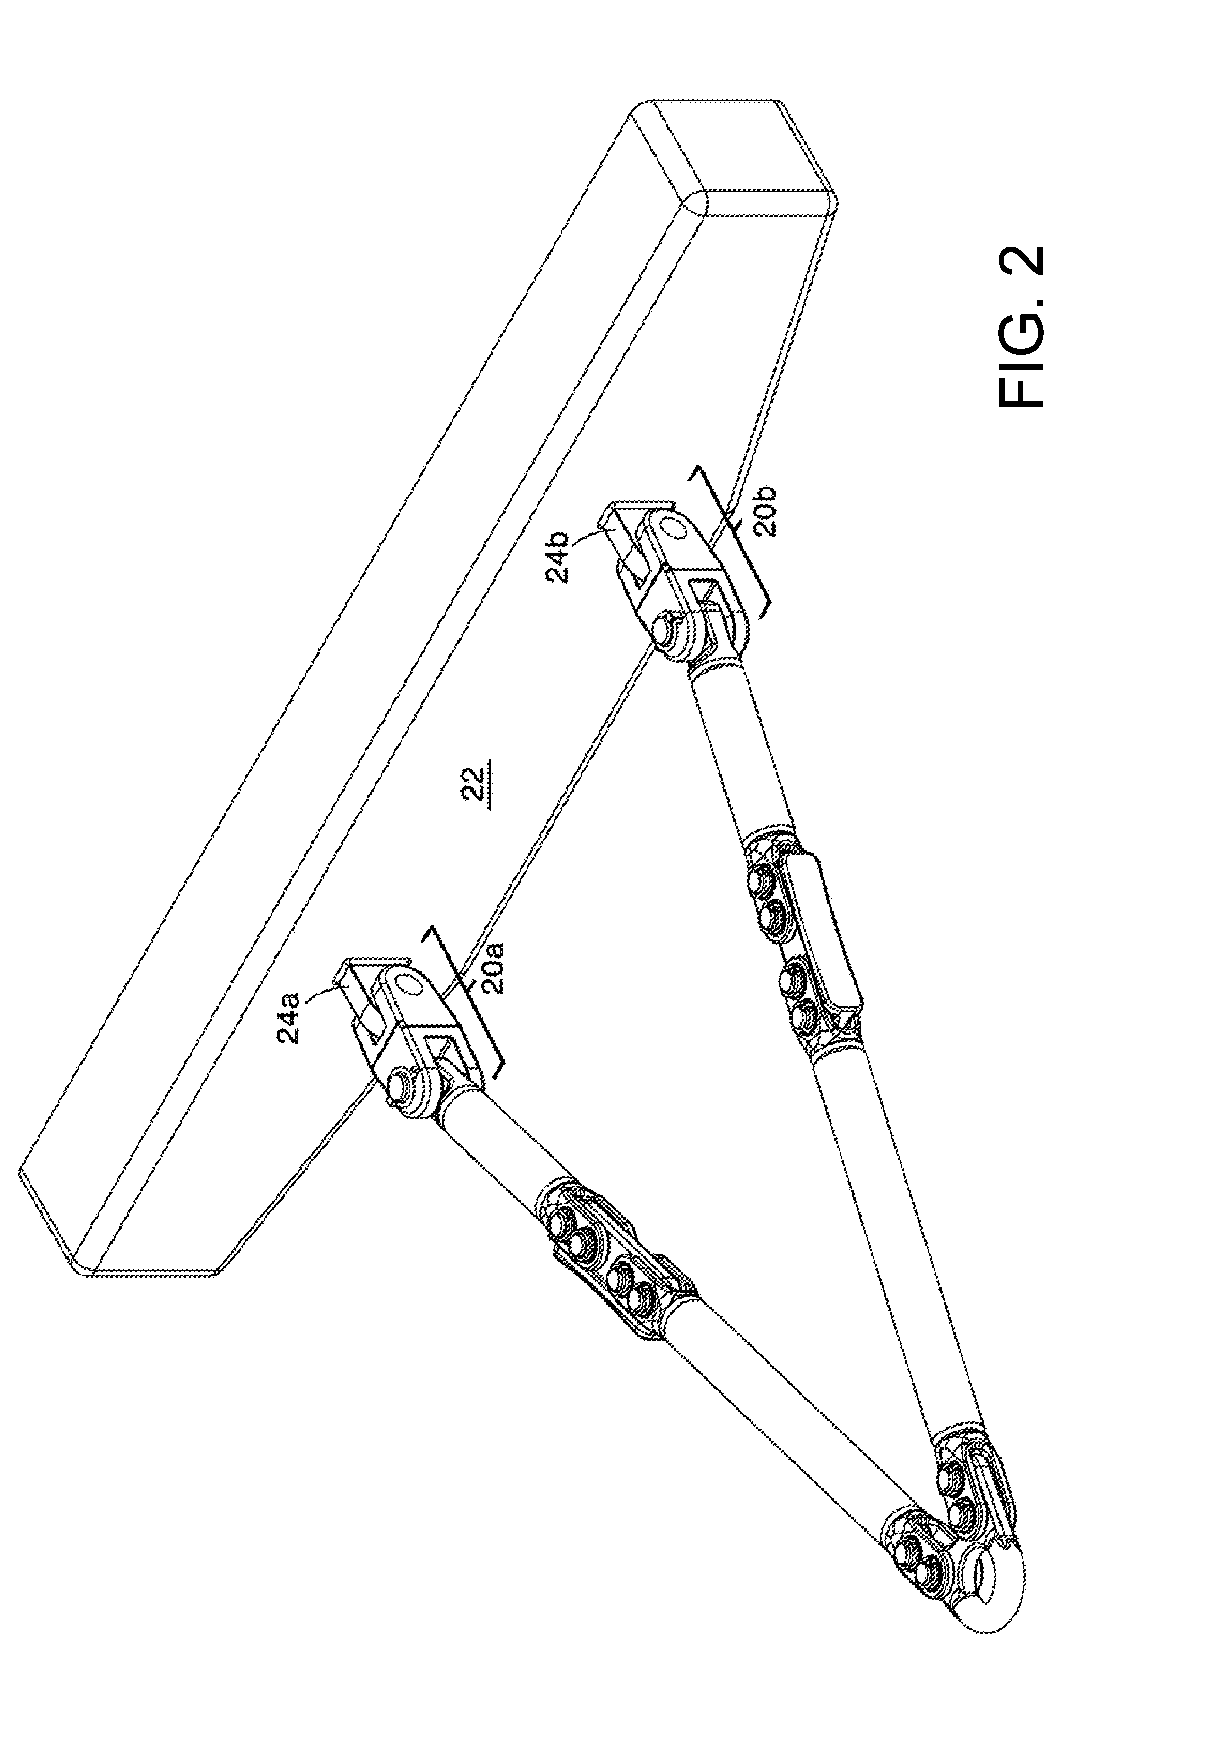 Towing assembly with automatic articulating mechanism